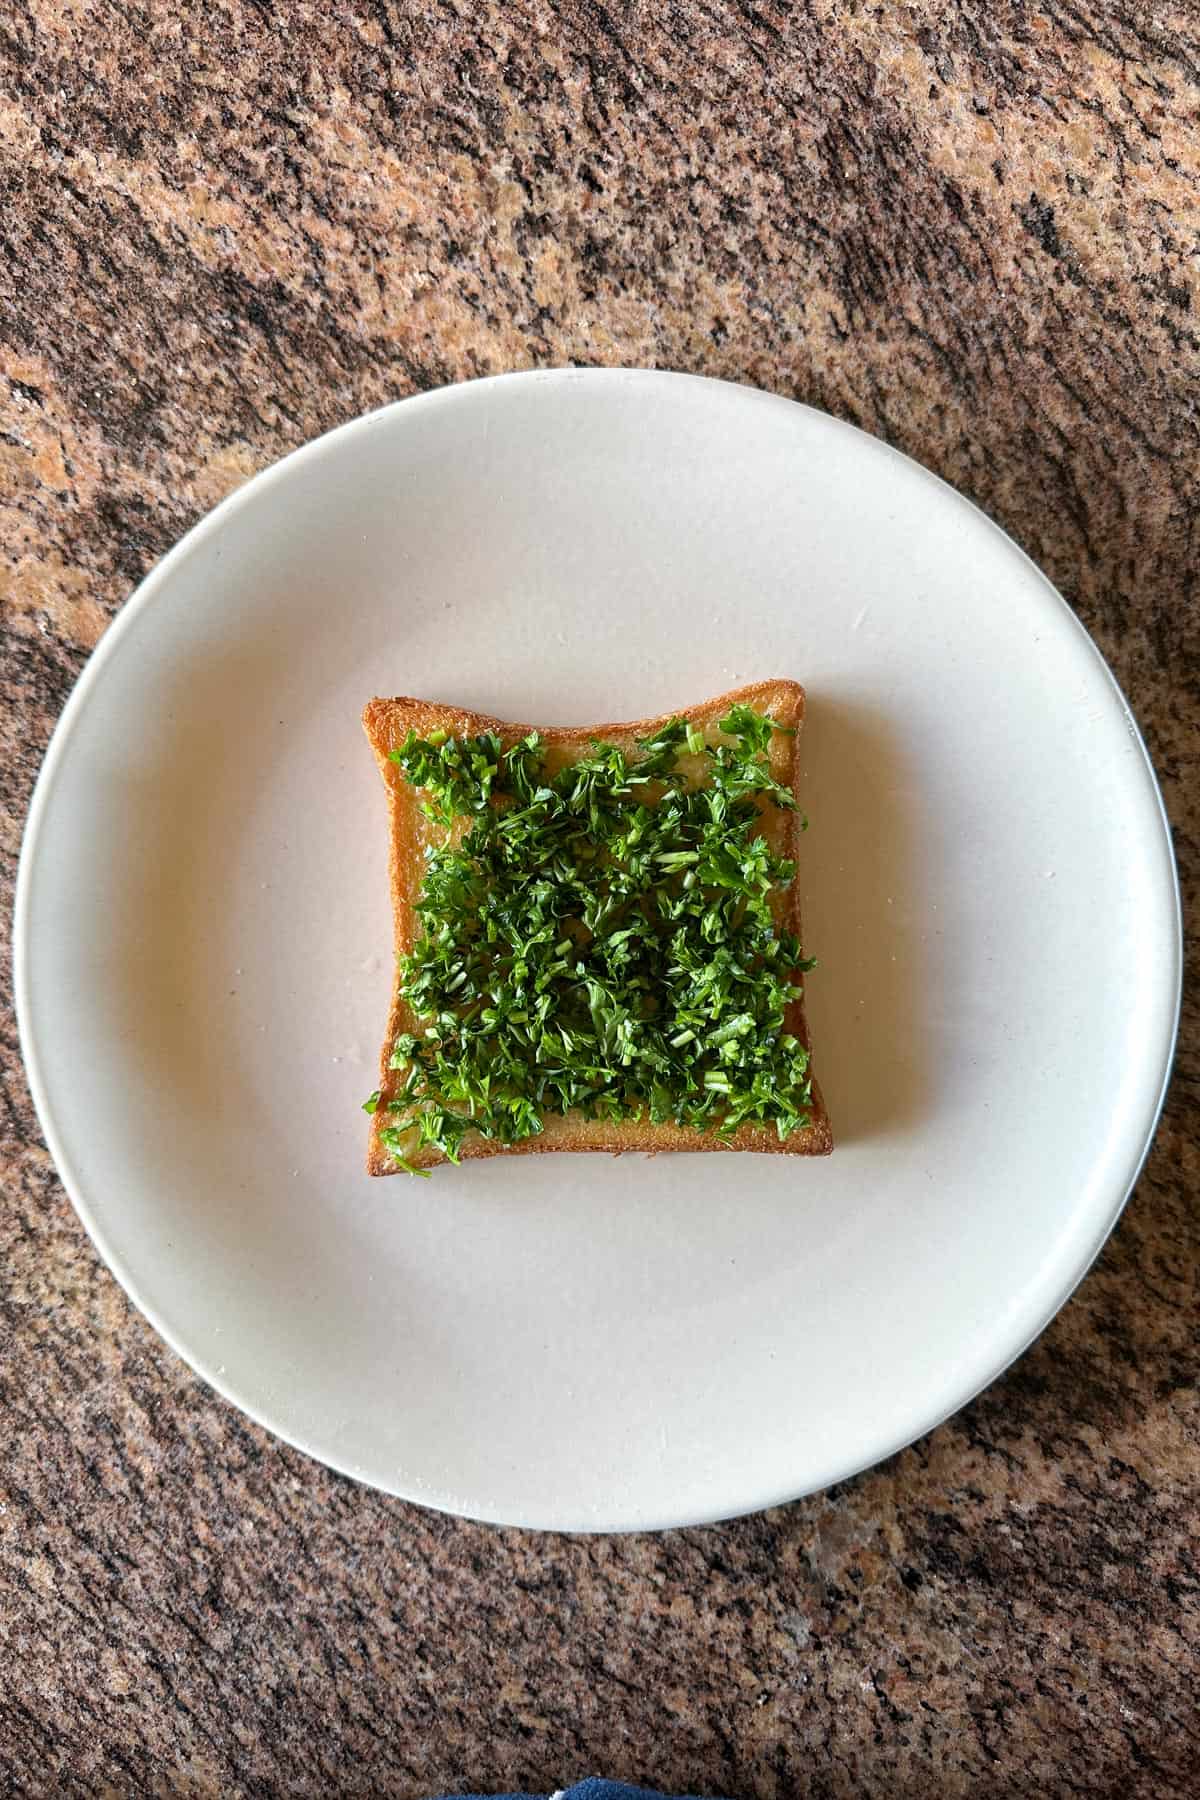 Two slices of bread with mayo, toasted, and with parsley on top.